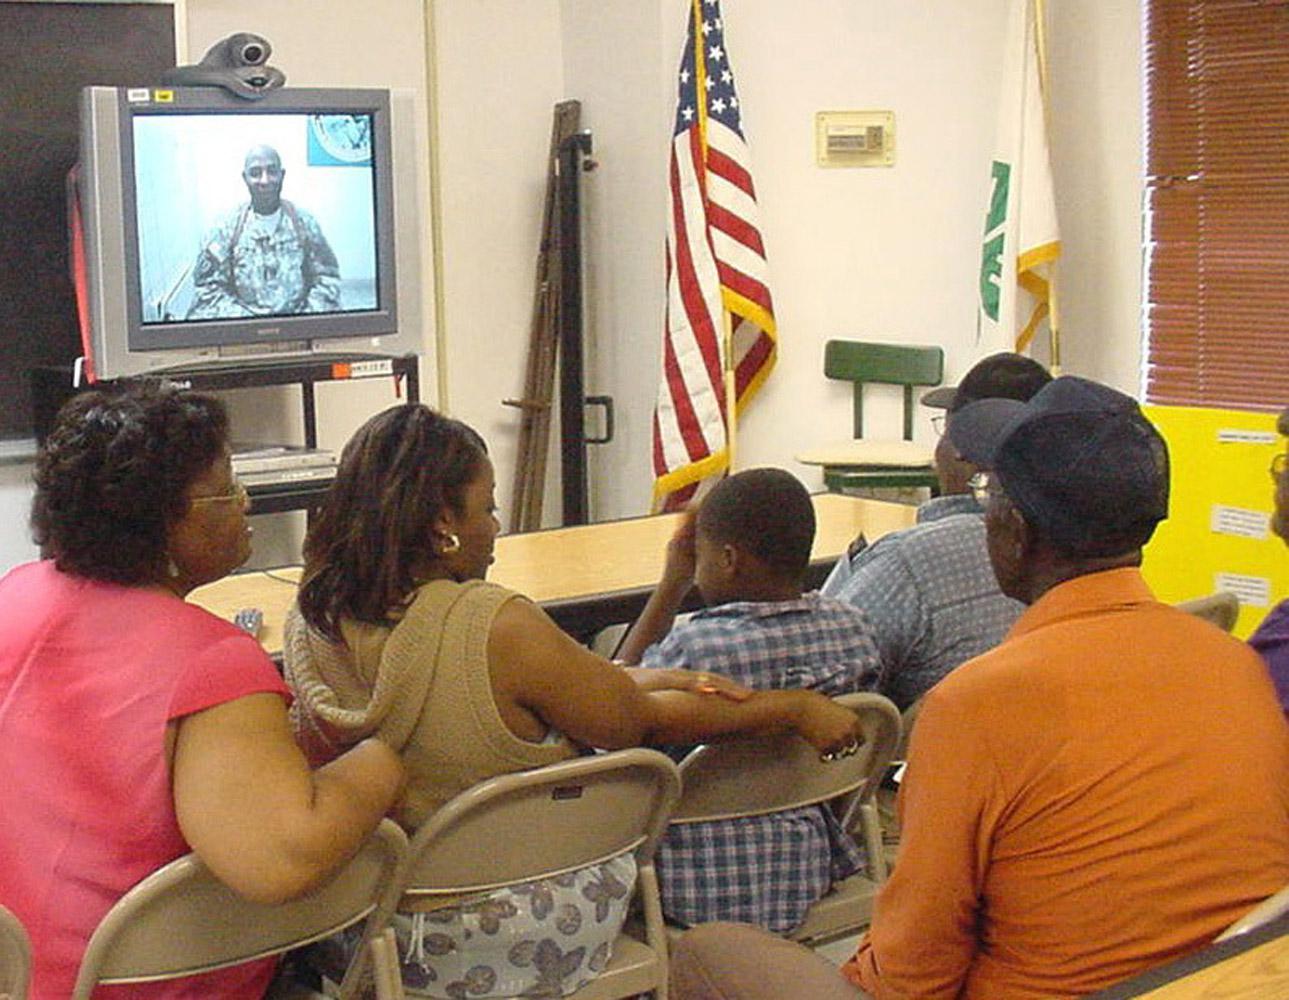 The Pittman family participates in a Freedom Call, which connects soldiers serving in Iraq to their families back home through videoconferencing technology.